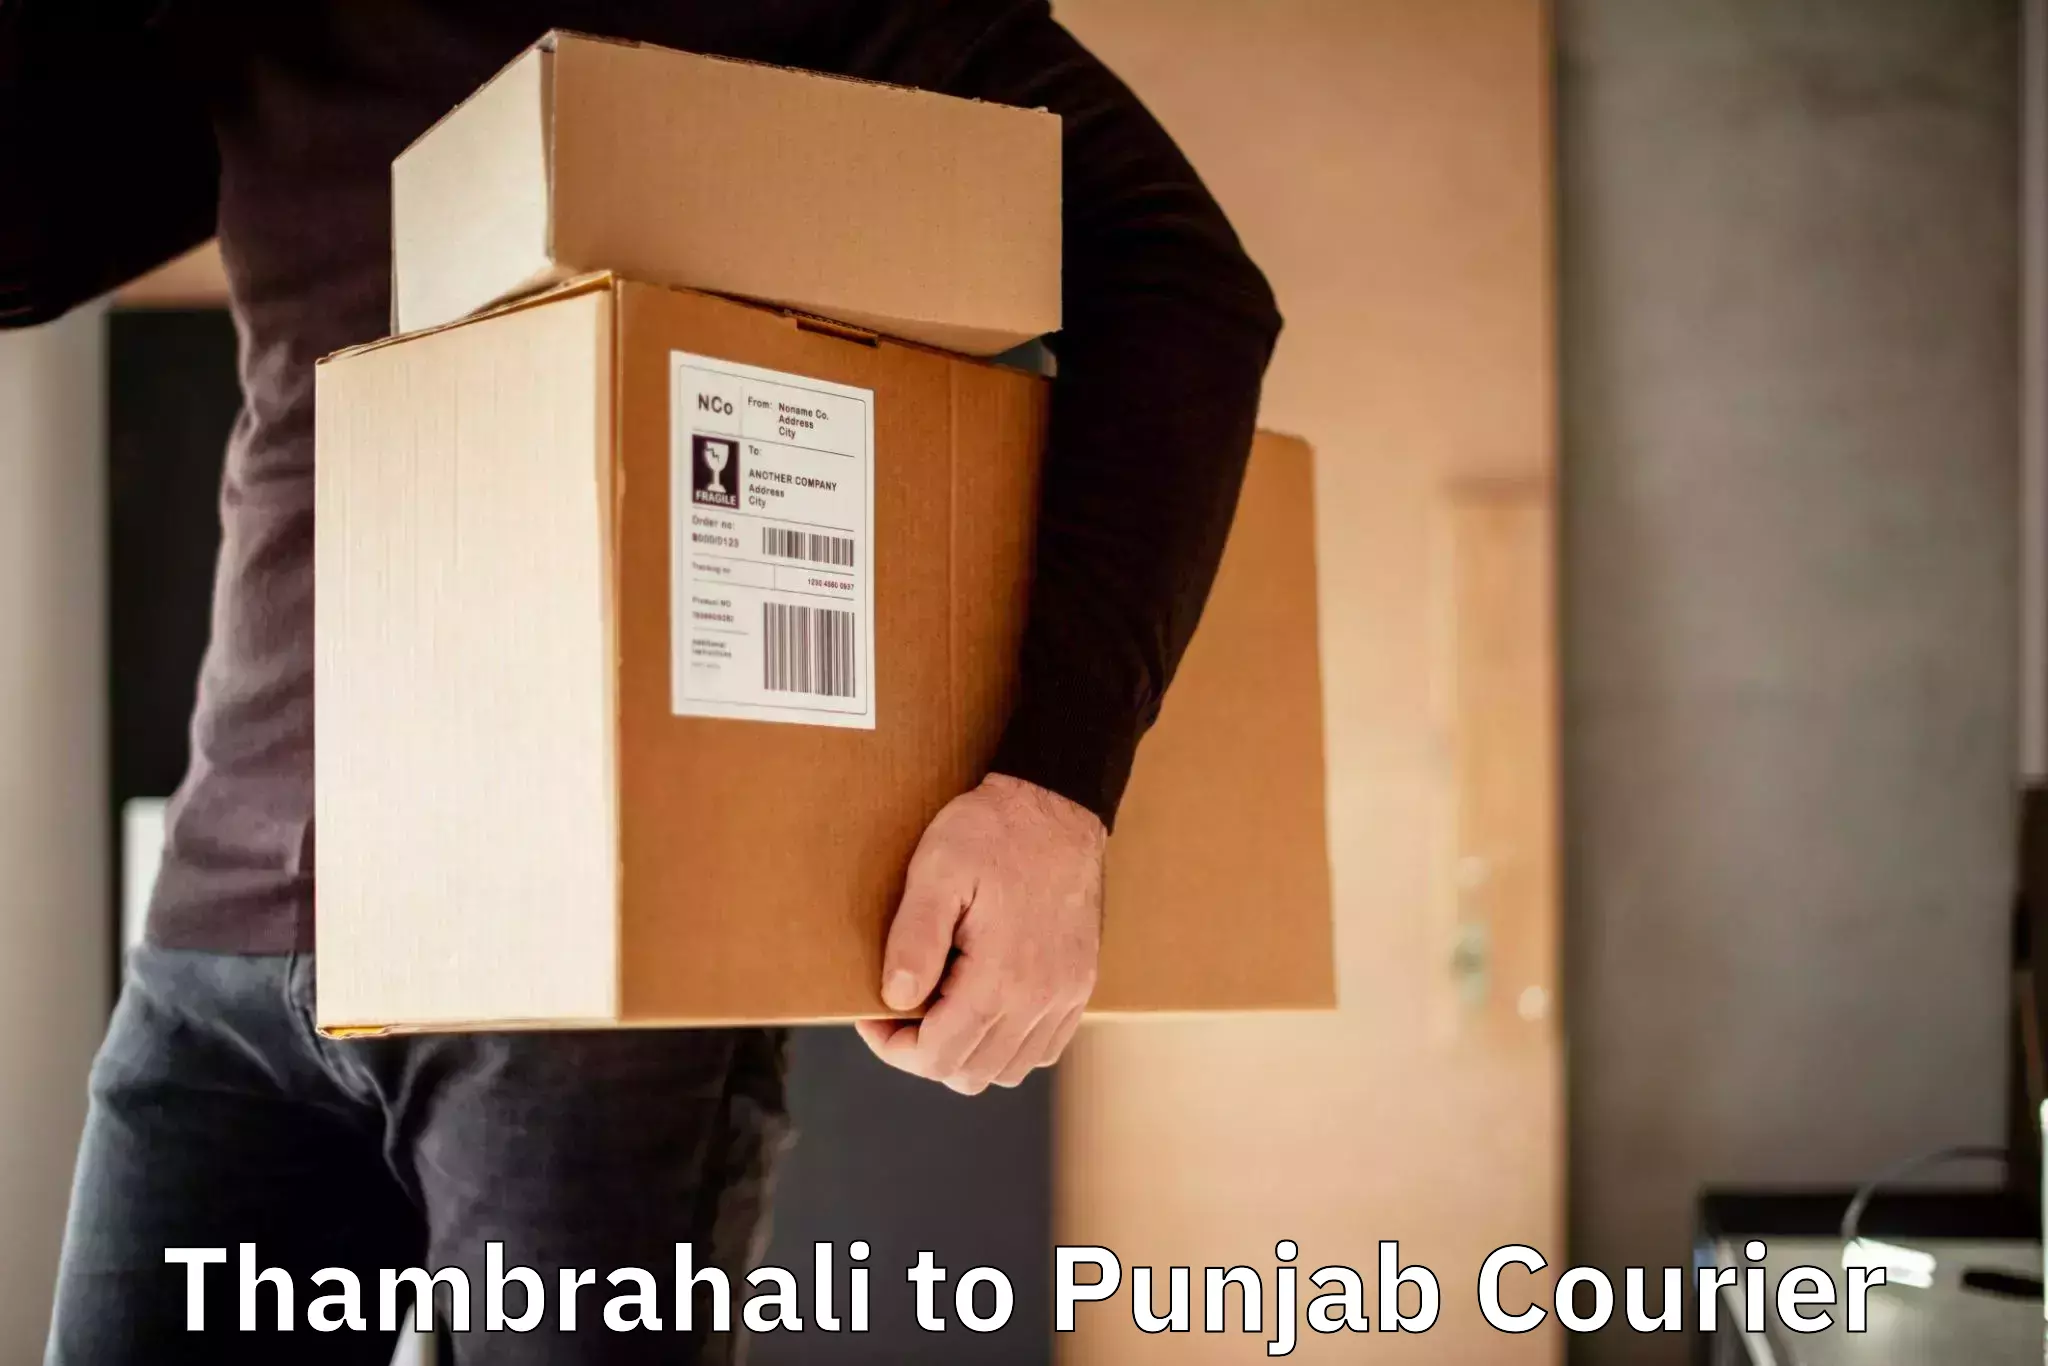 24-hour courier service Thambrahali to Thapar Institute of Engineering and Technology Patiala